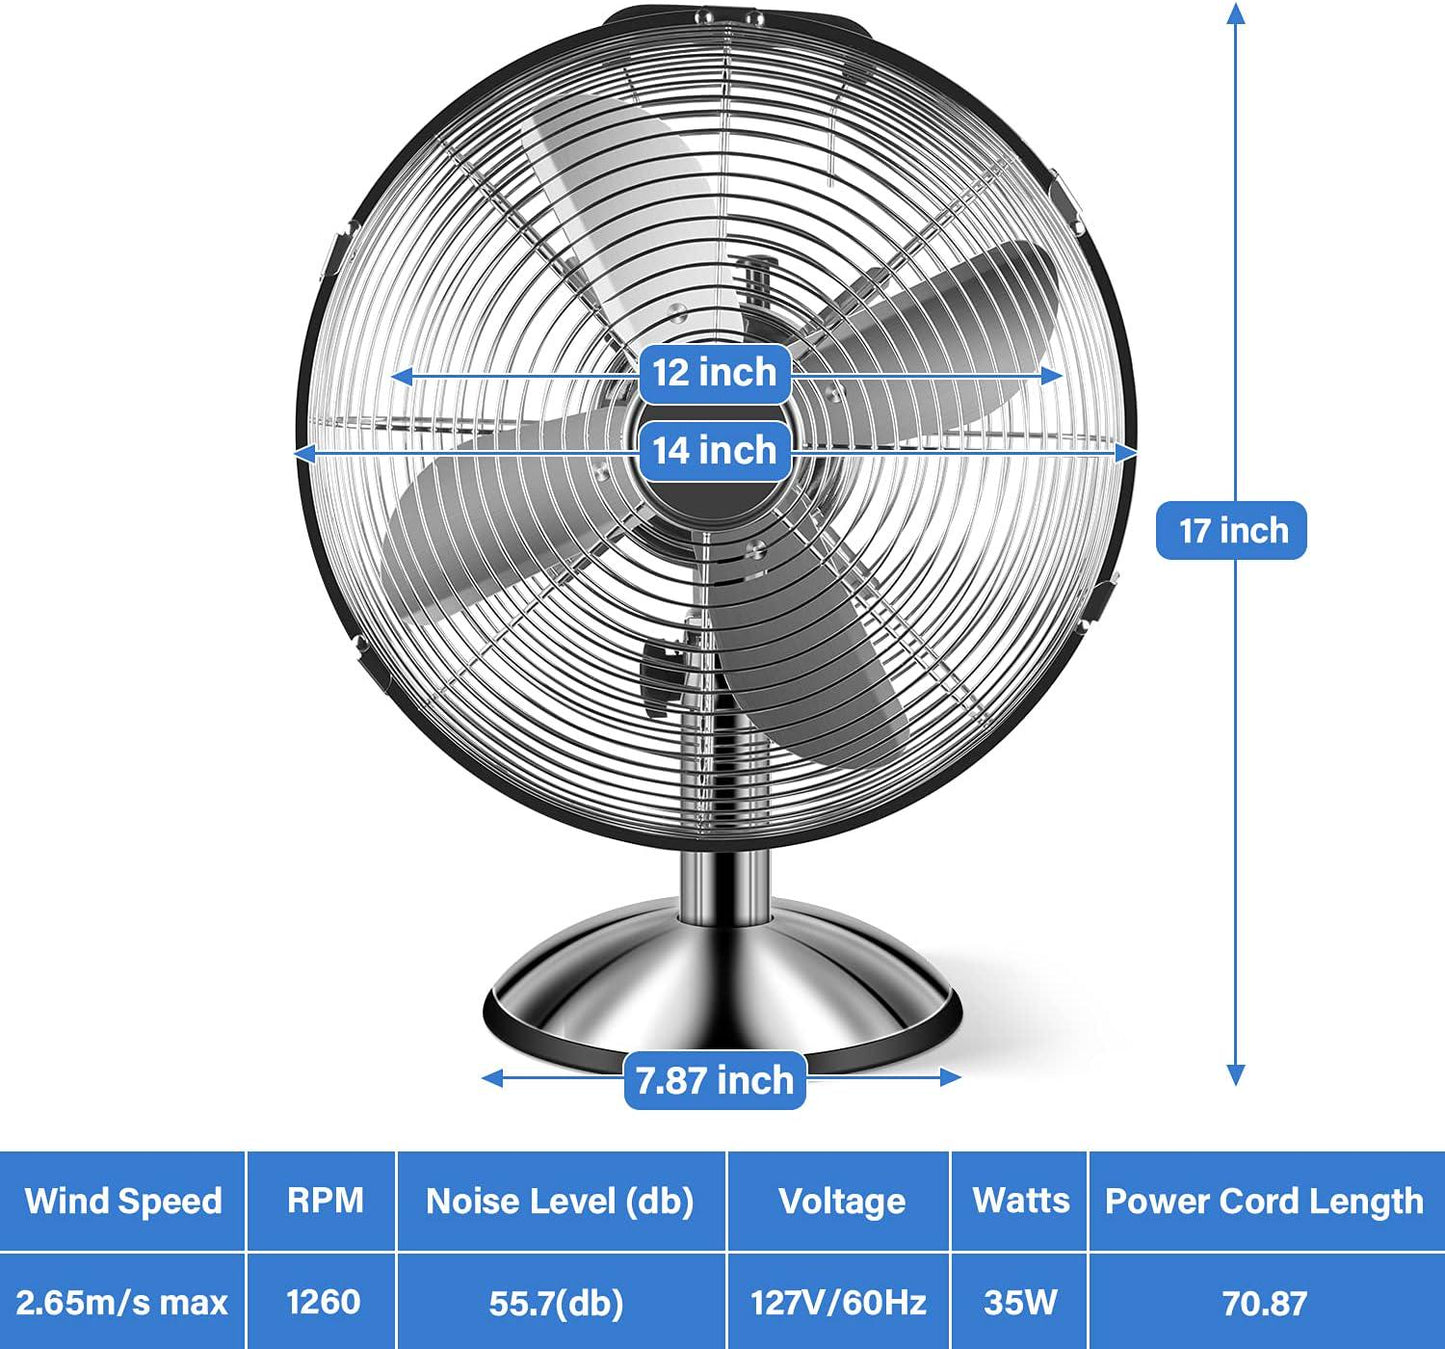 Deluxe 12 Inch Stand Fan, Horizontal Ocillation 75°, 3 Settings Speeds, Low Noise, Quality Made Durable Fan, High Velocity, Heavy Duty Metal For Industrial, Commercial